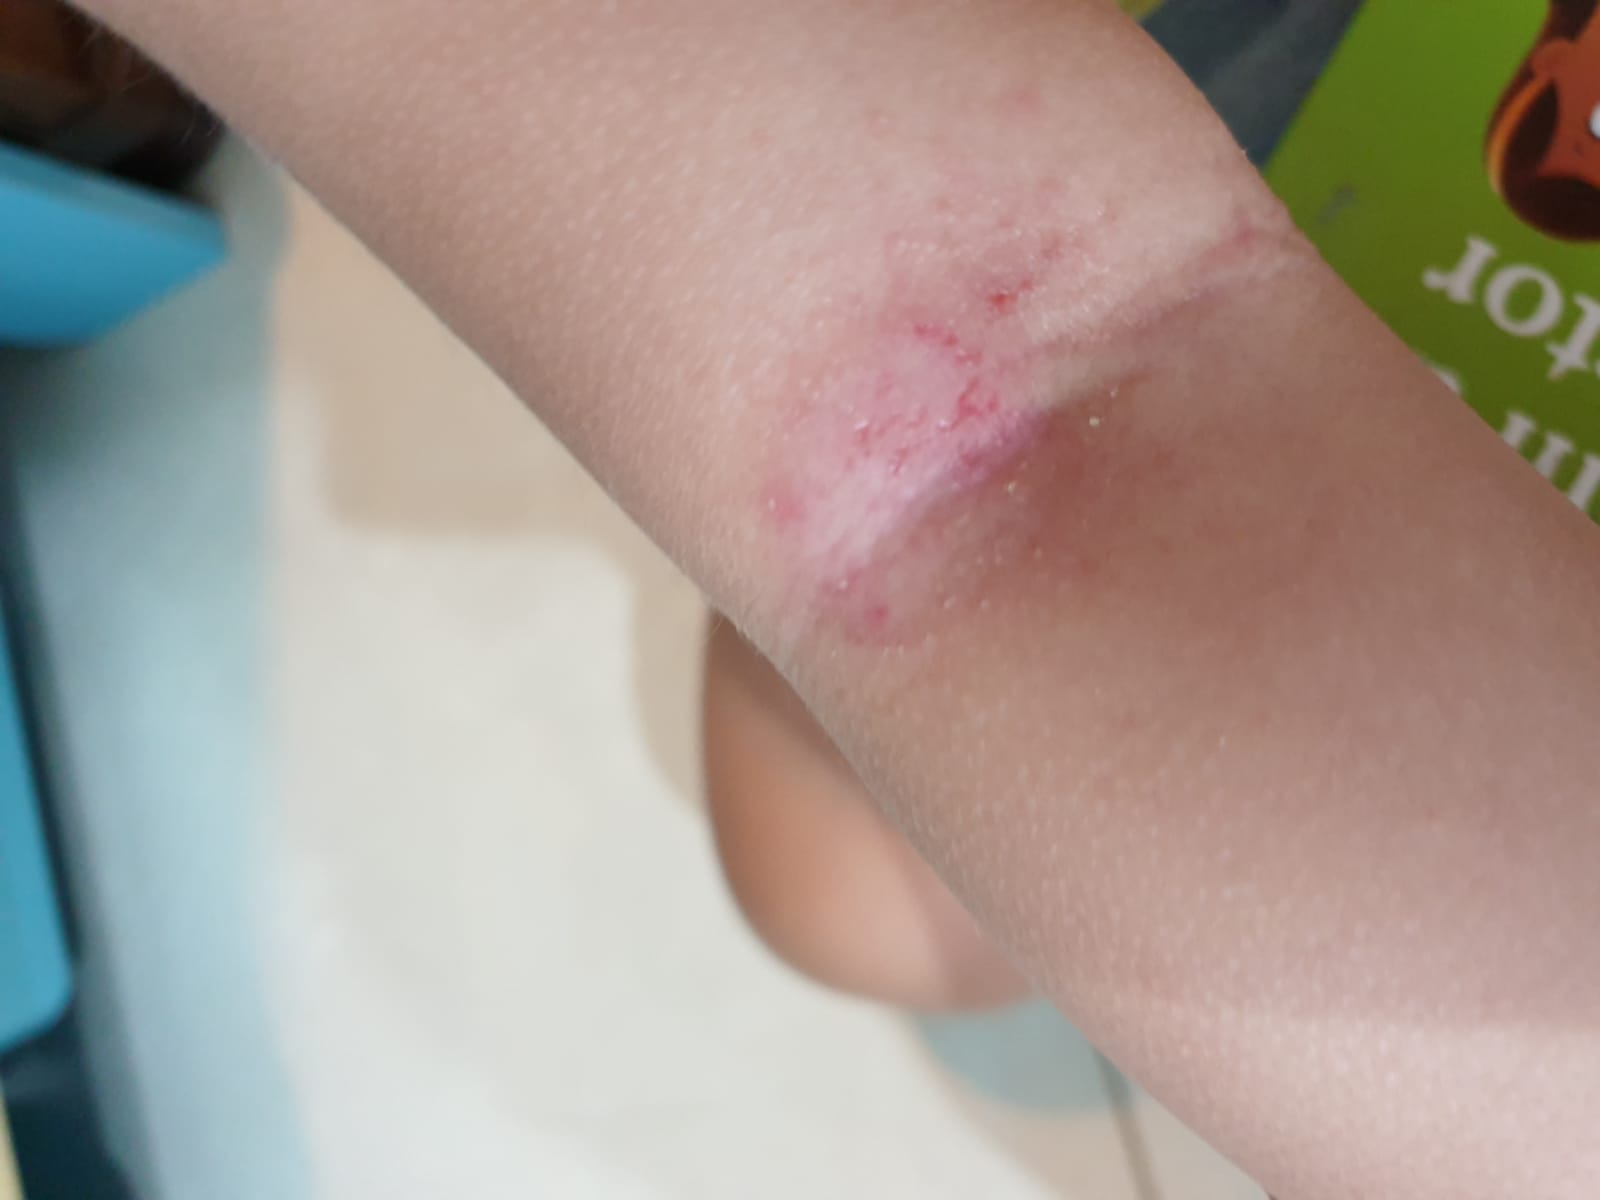 Above: Another view of baby’s eczema on inside elbow